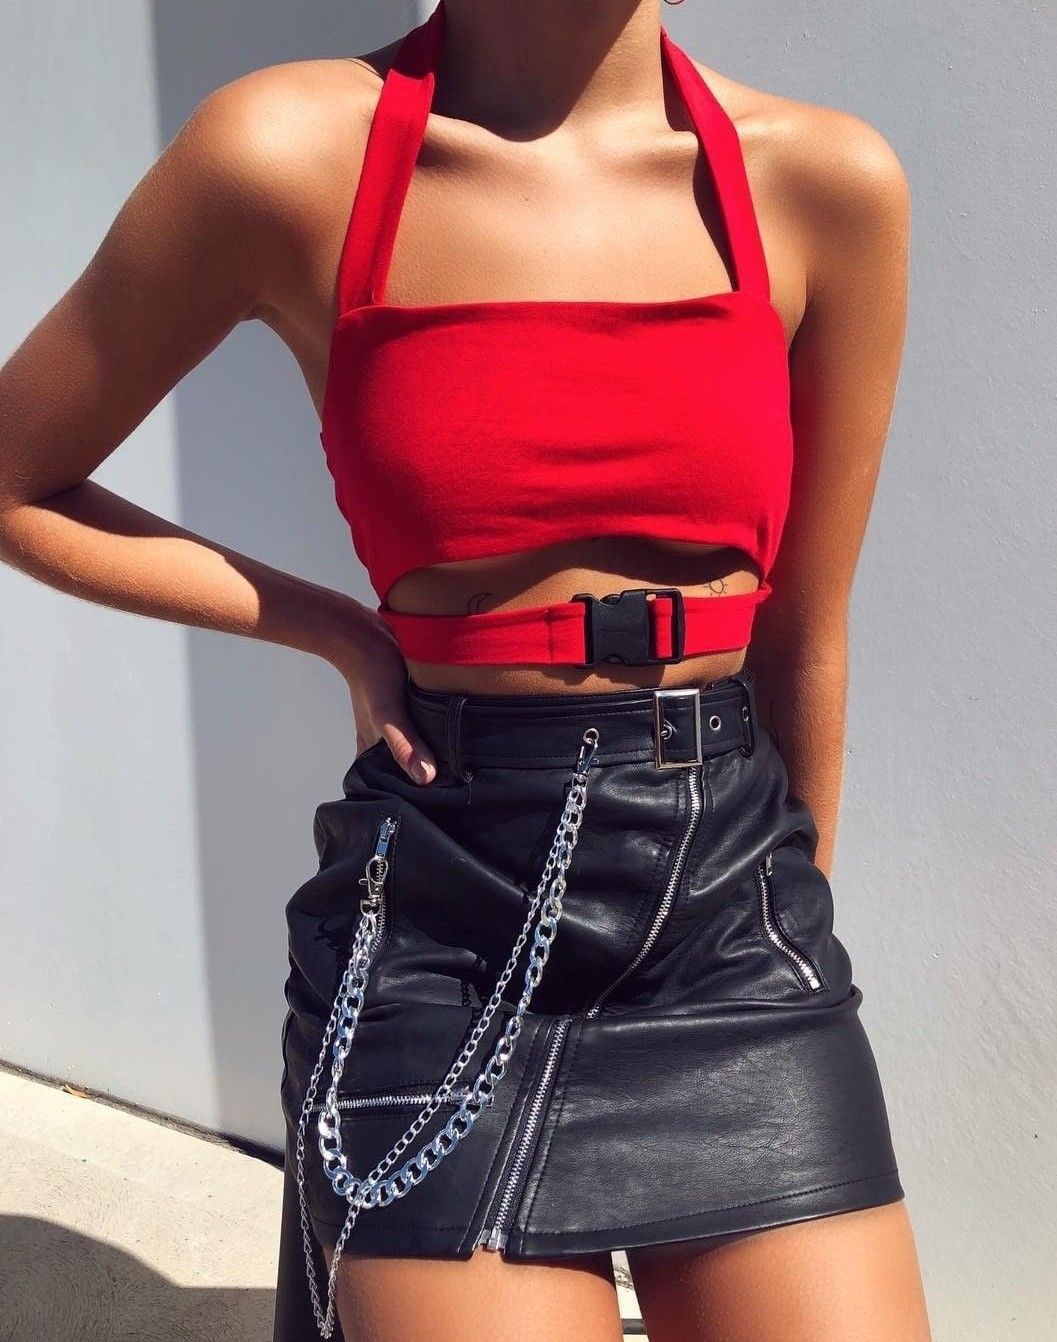 Red crop top with buckle | Bandeau Top Outfits | Bandeau Dresses, Crop ...